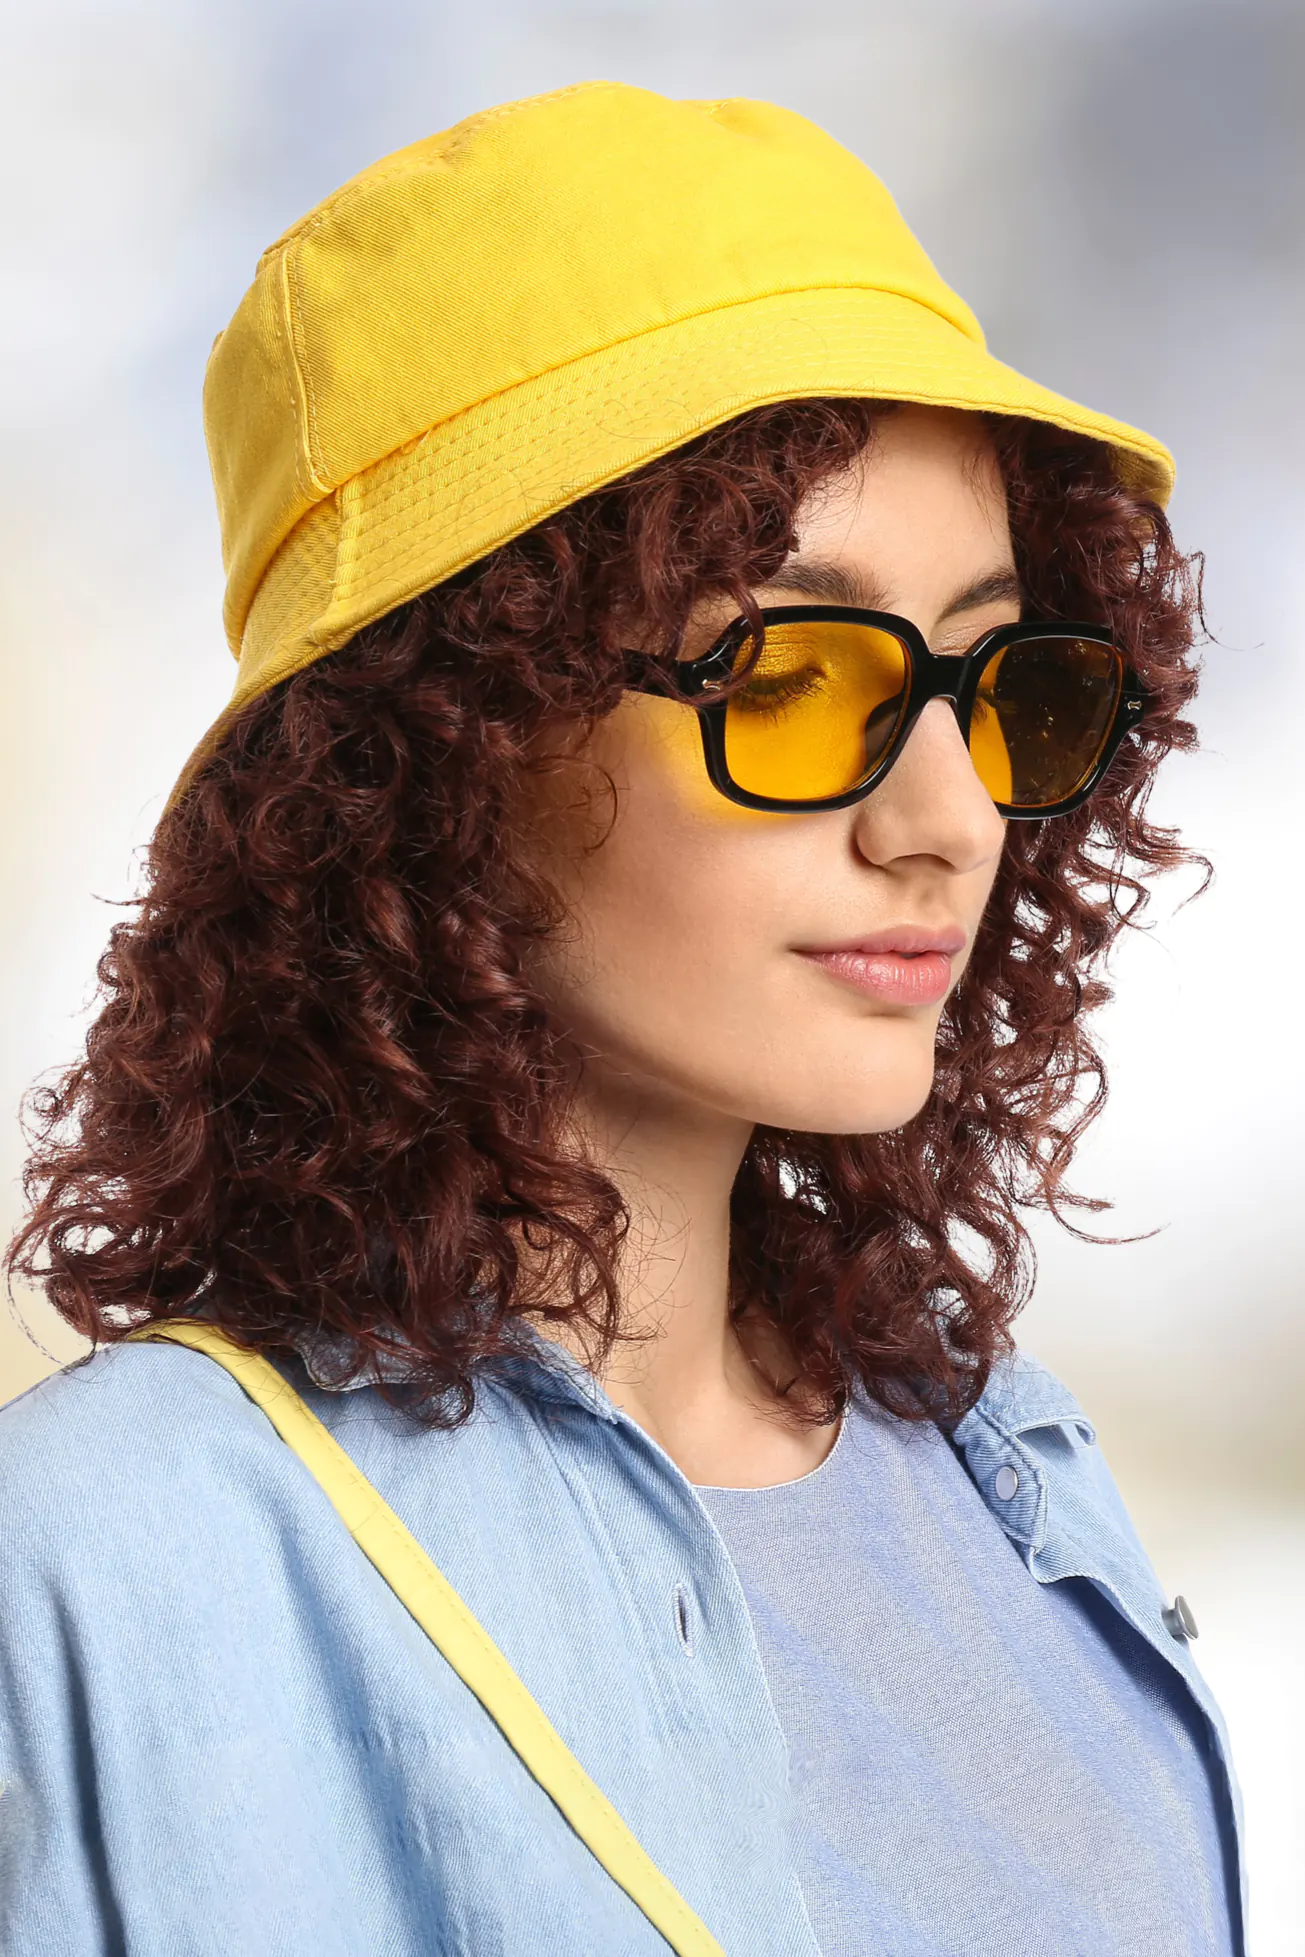 Young woman with curly hair in stylish sunglasses wearing yellow bucket hat on white background